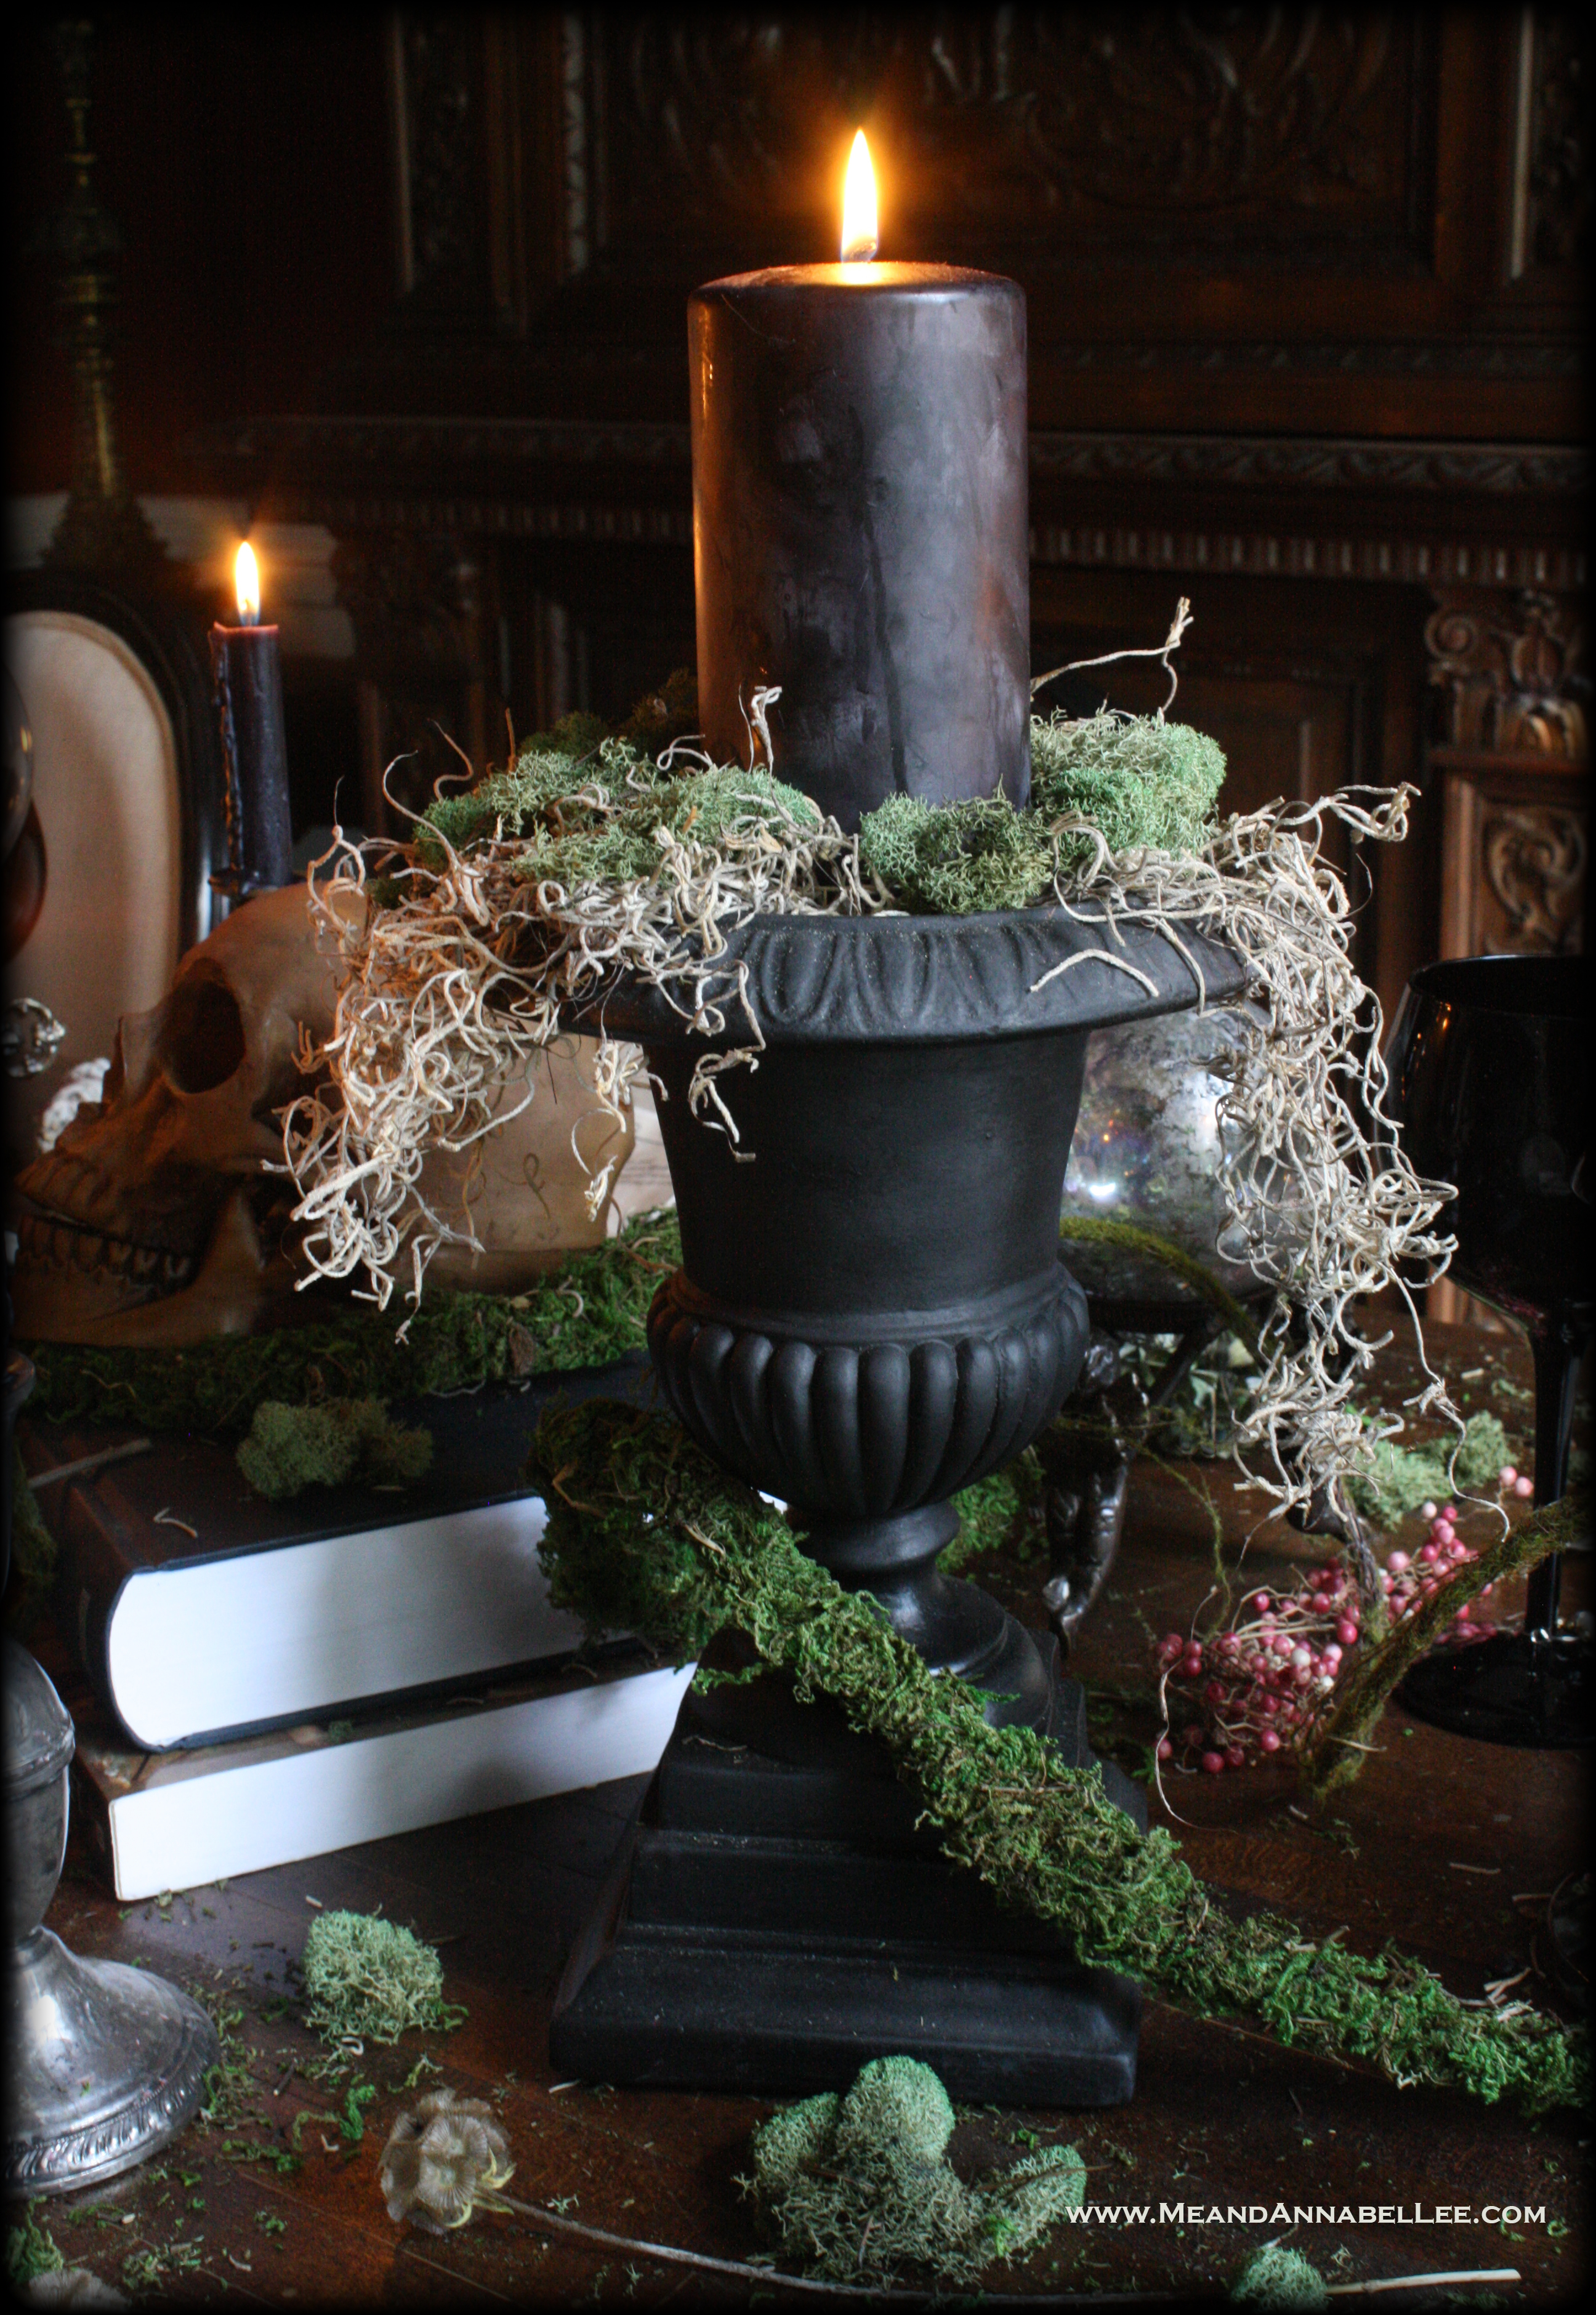 Witches Dinner Party | DIY Black Urns | Spanish Moss | Black Candles | Enchanted Forest | Goth Home Décor | Elegant Halloween Decorations | www.MeandAnnabelLee.com